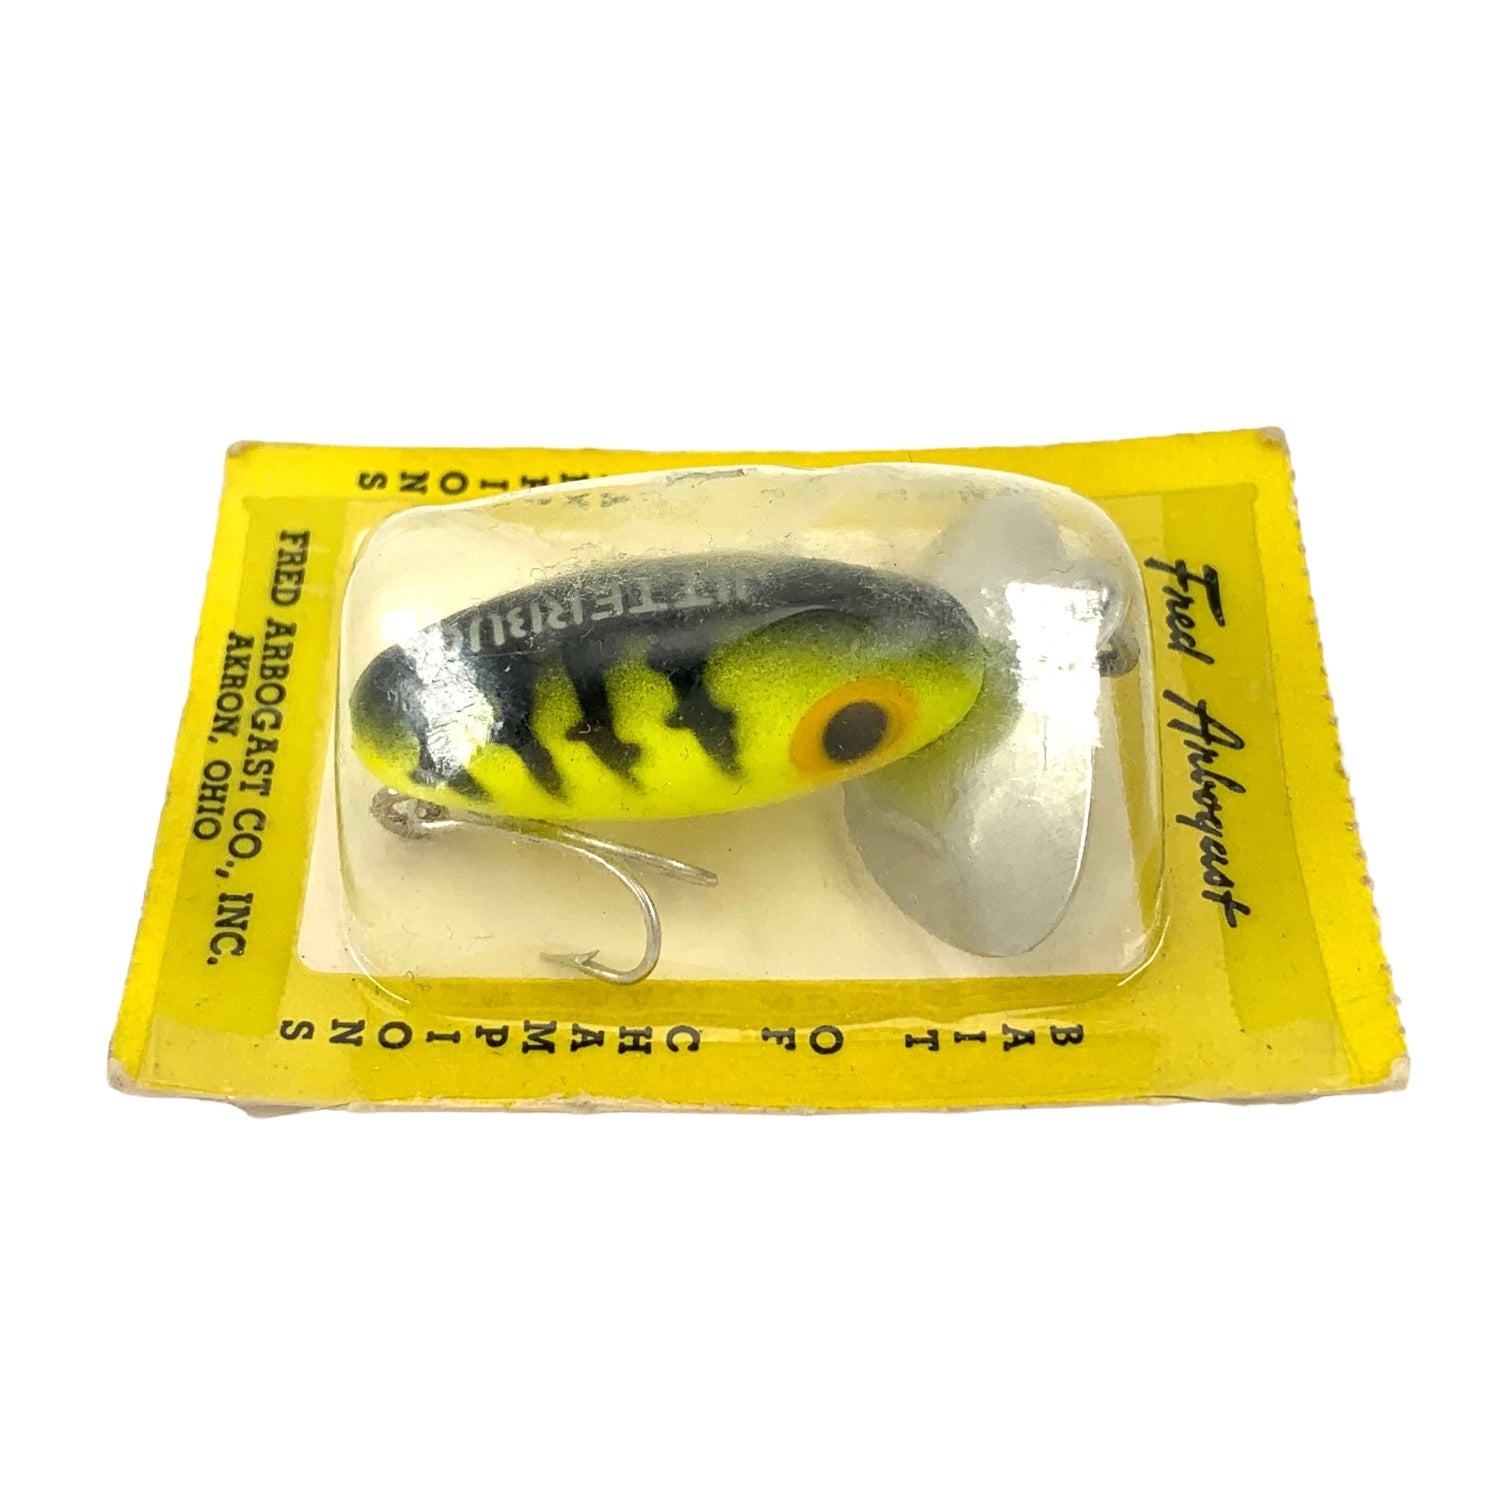 FRED ARBOGAST Fly Rod Size JITTERBUG Lure • CHARTREUSE SOB – Toad Tackle